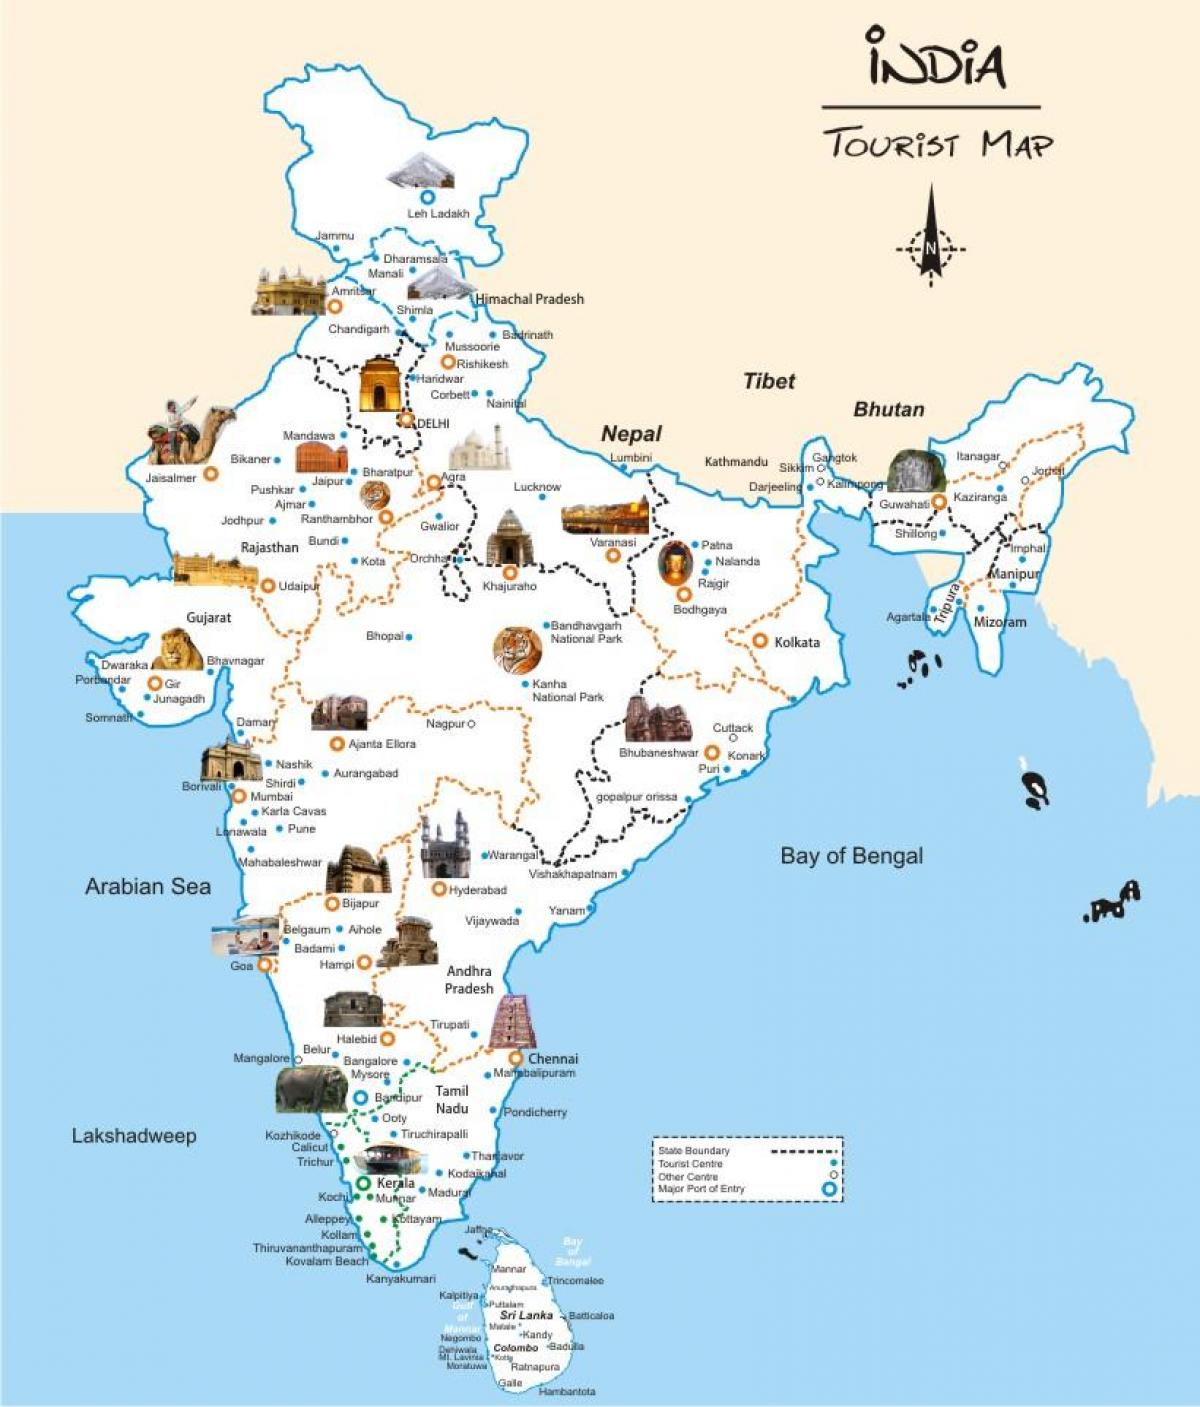 which state has most tourist places in india